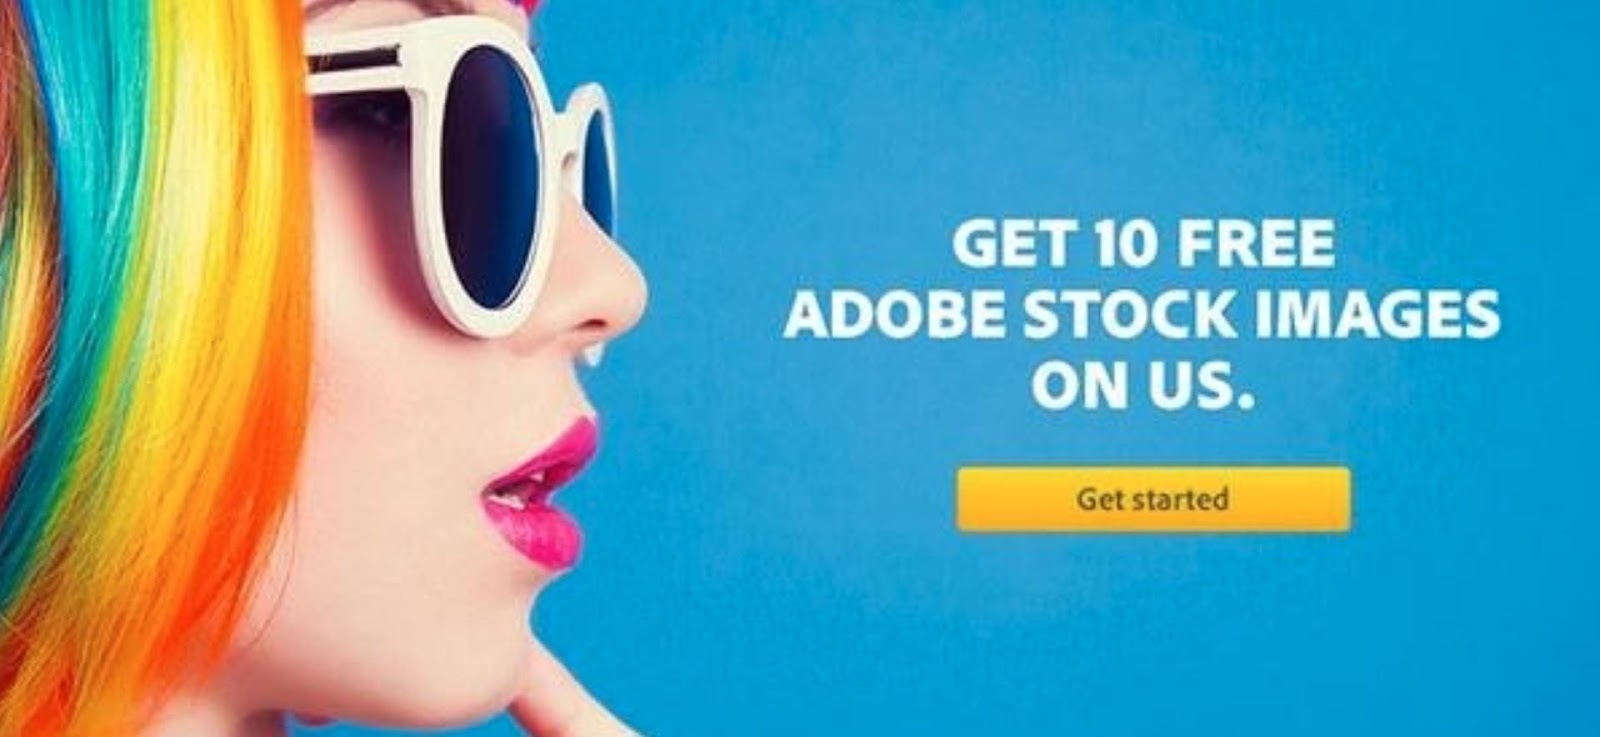 Adobe banner ad featuring a young woman with rainbow colored hair against a sky blue backdrop